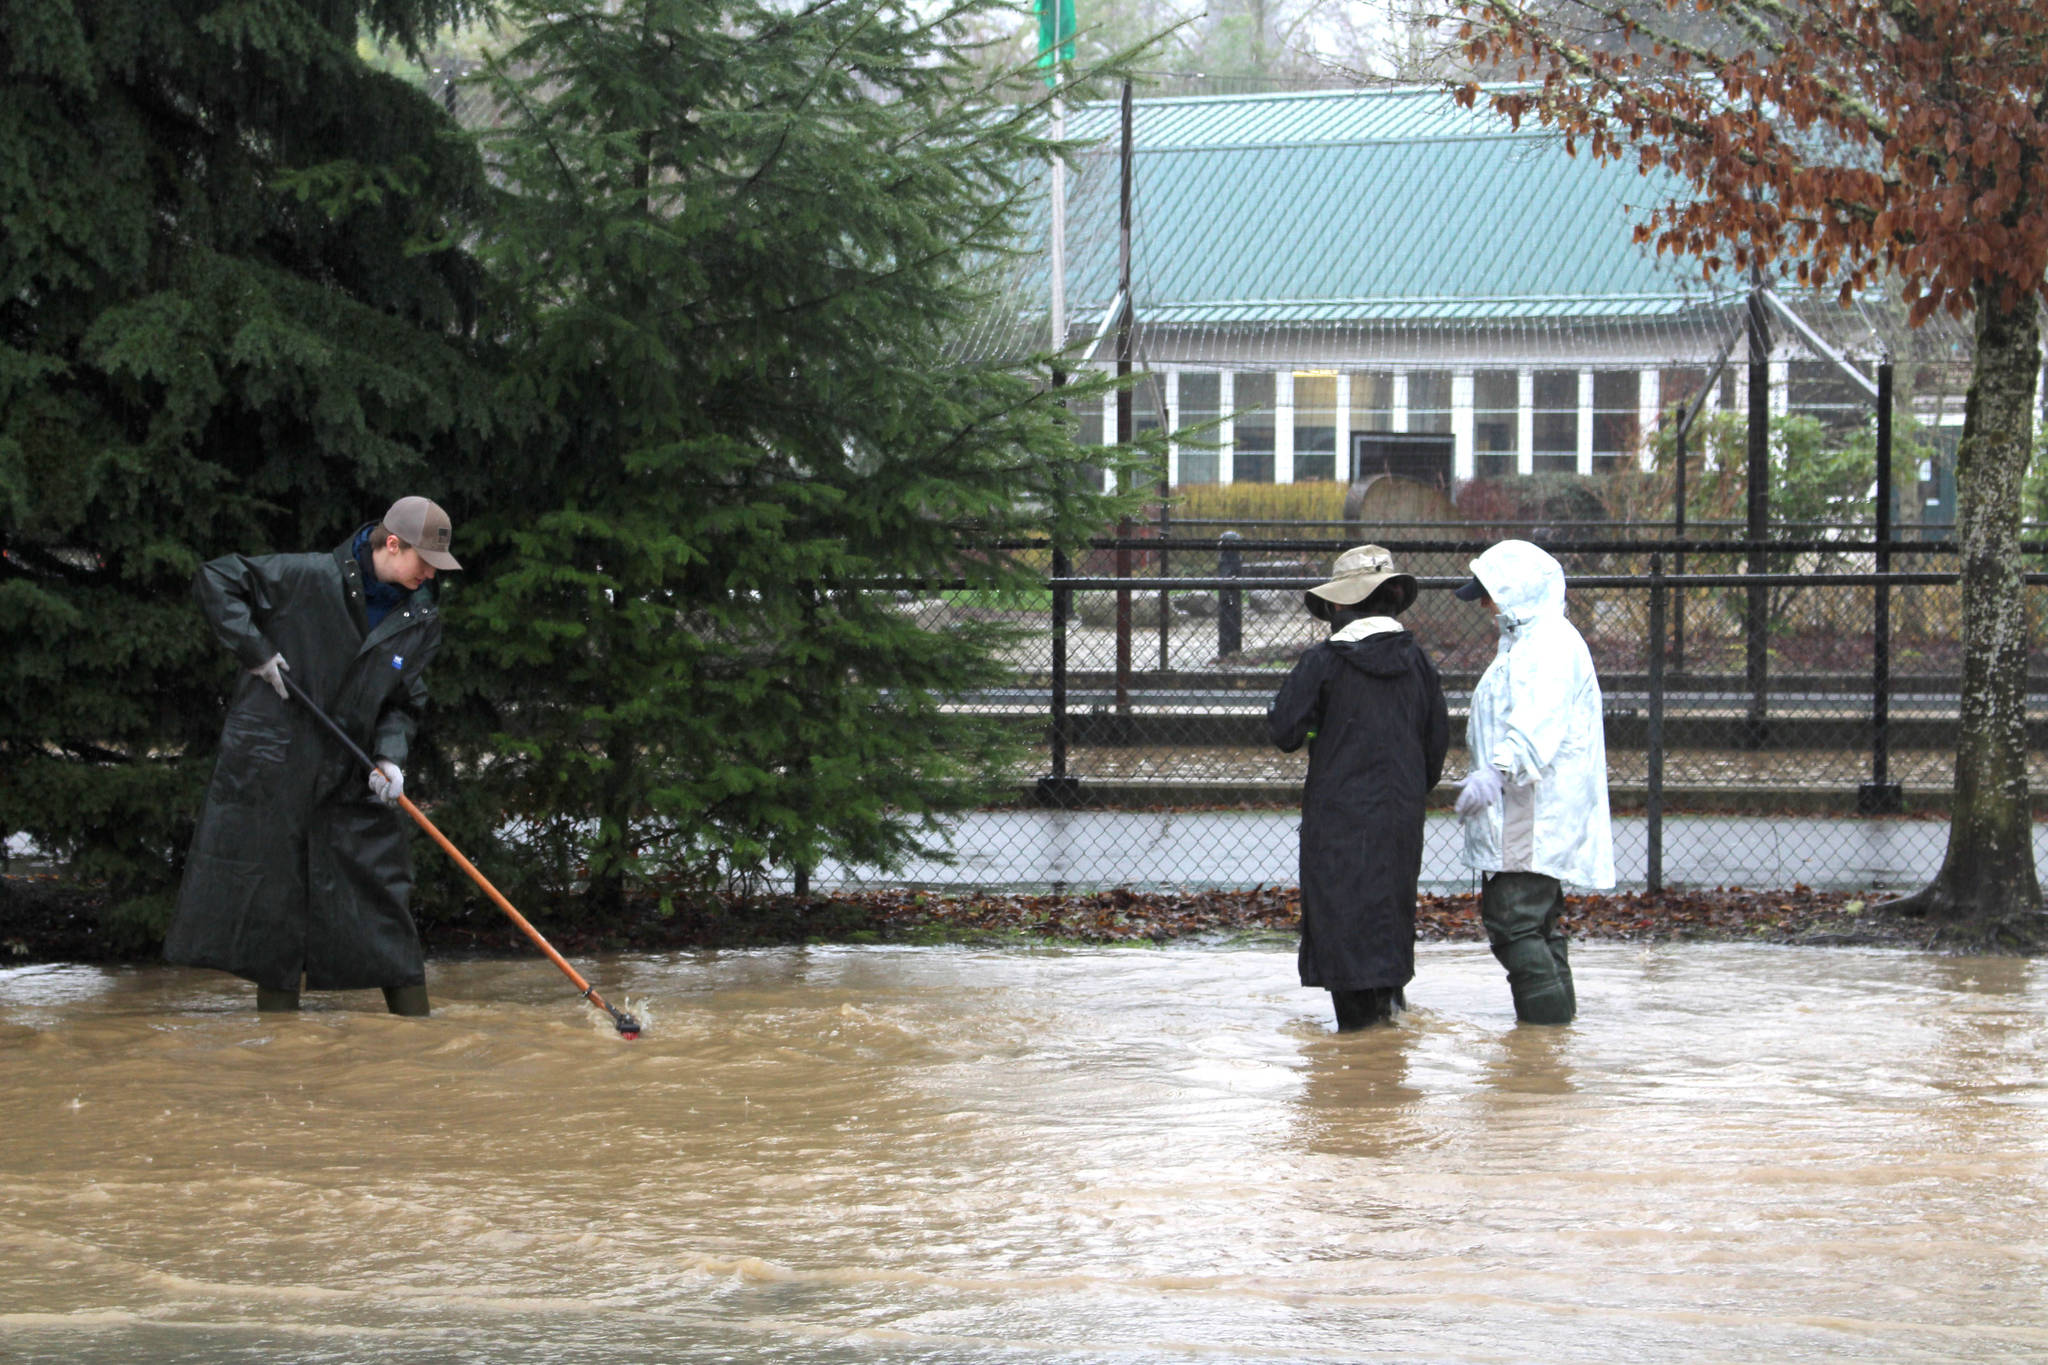 Theo Koshar, Janet McIntosh and Robin Kelley of the Issaquah Salmon Hatchery work to find road drains and clear them of leaves, outside the Issaquah Salmon Hatchery in Issaquah, WA on Feb. 6, 2020. Mitchell Atencio/Staff Photo